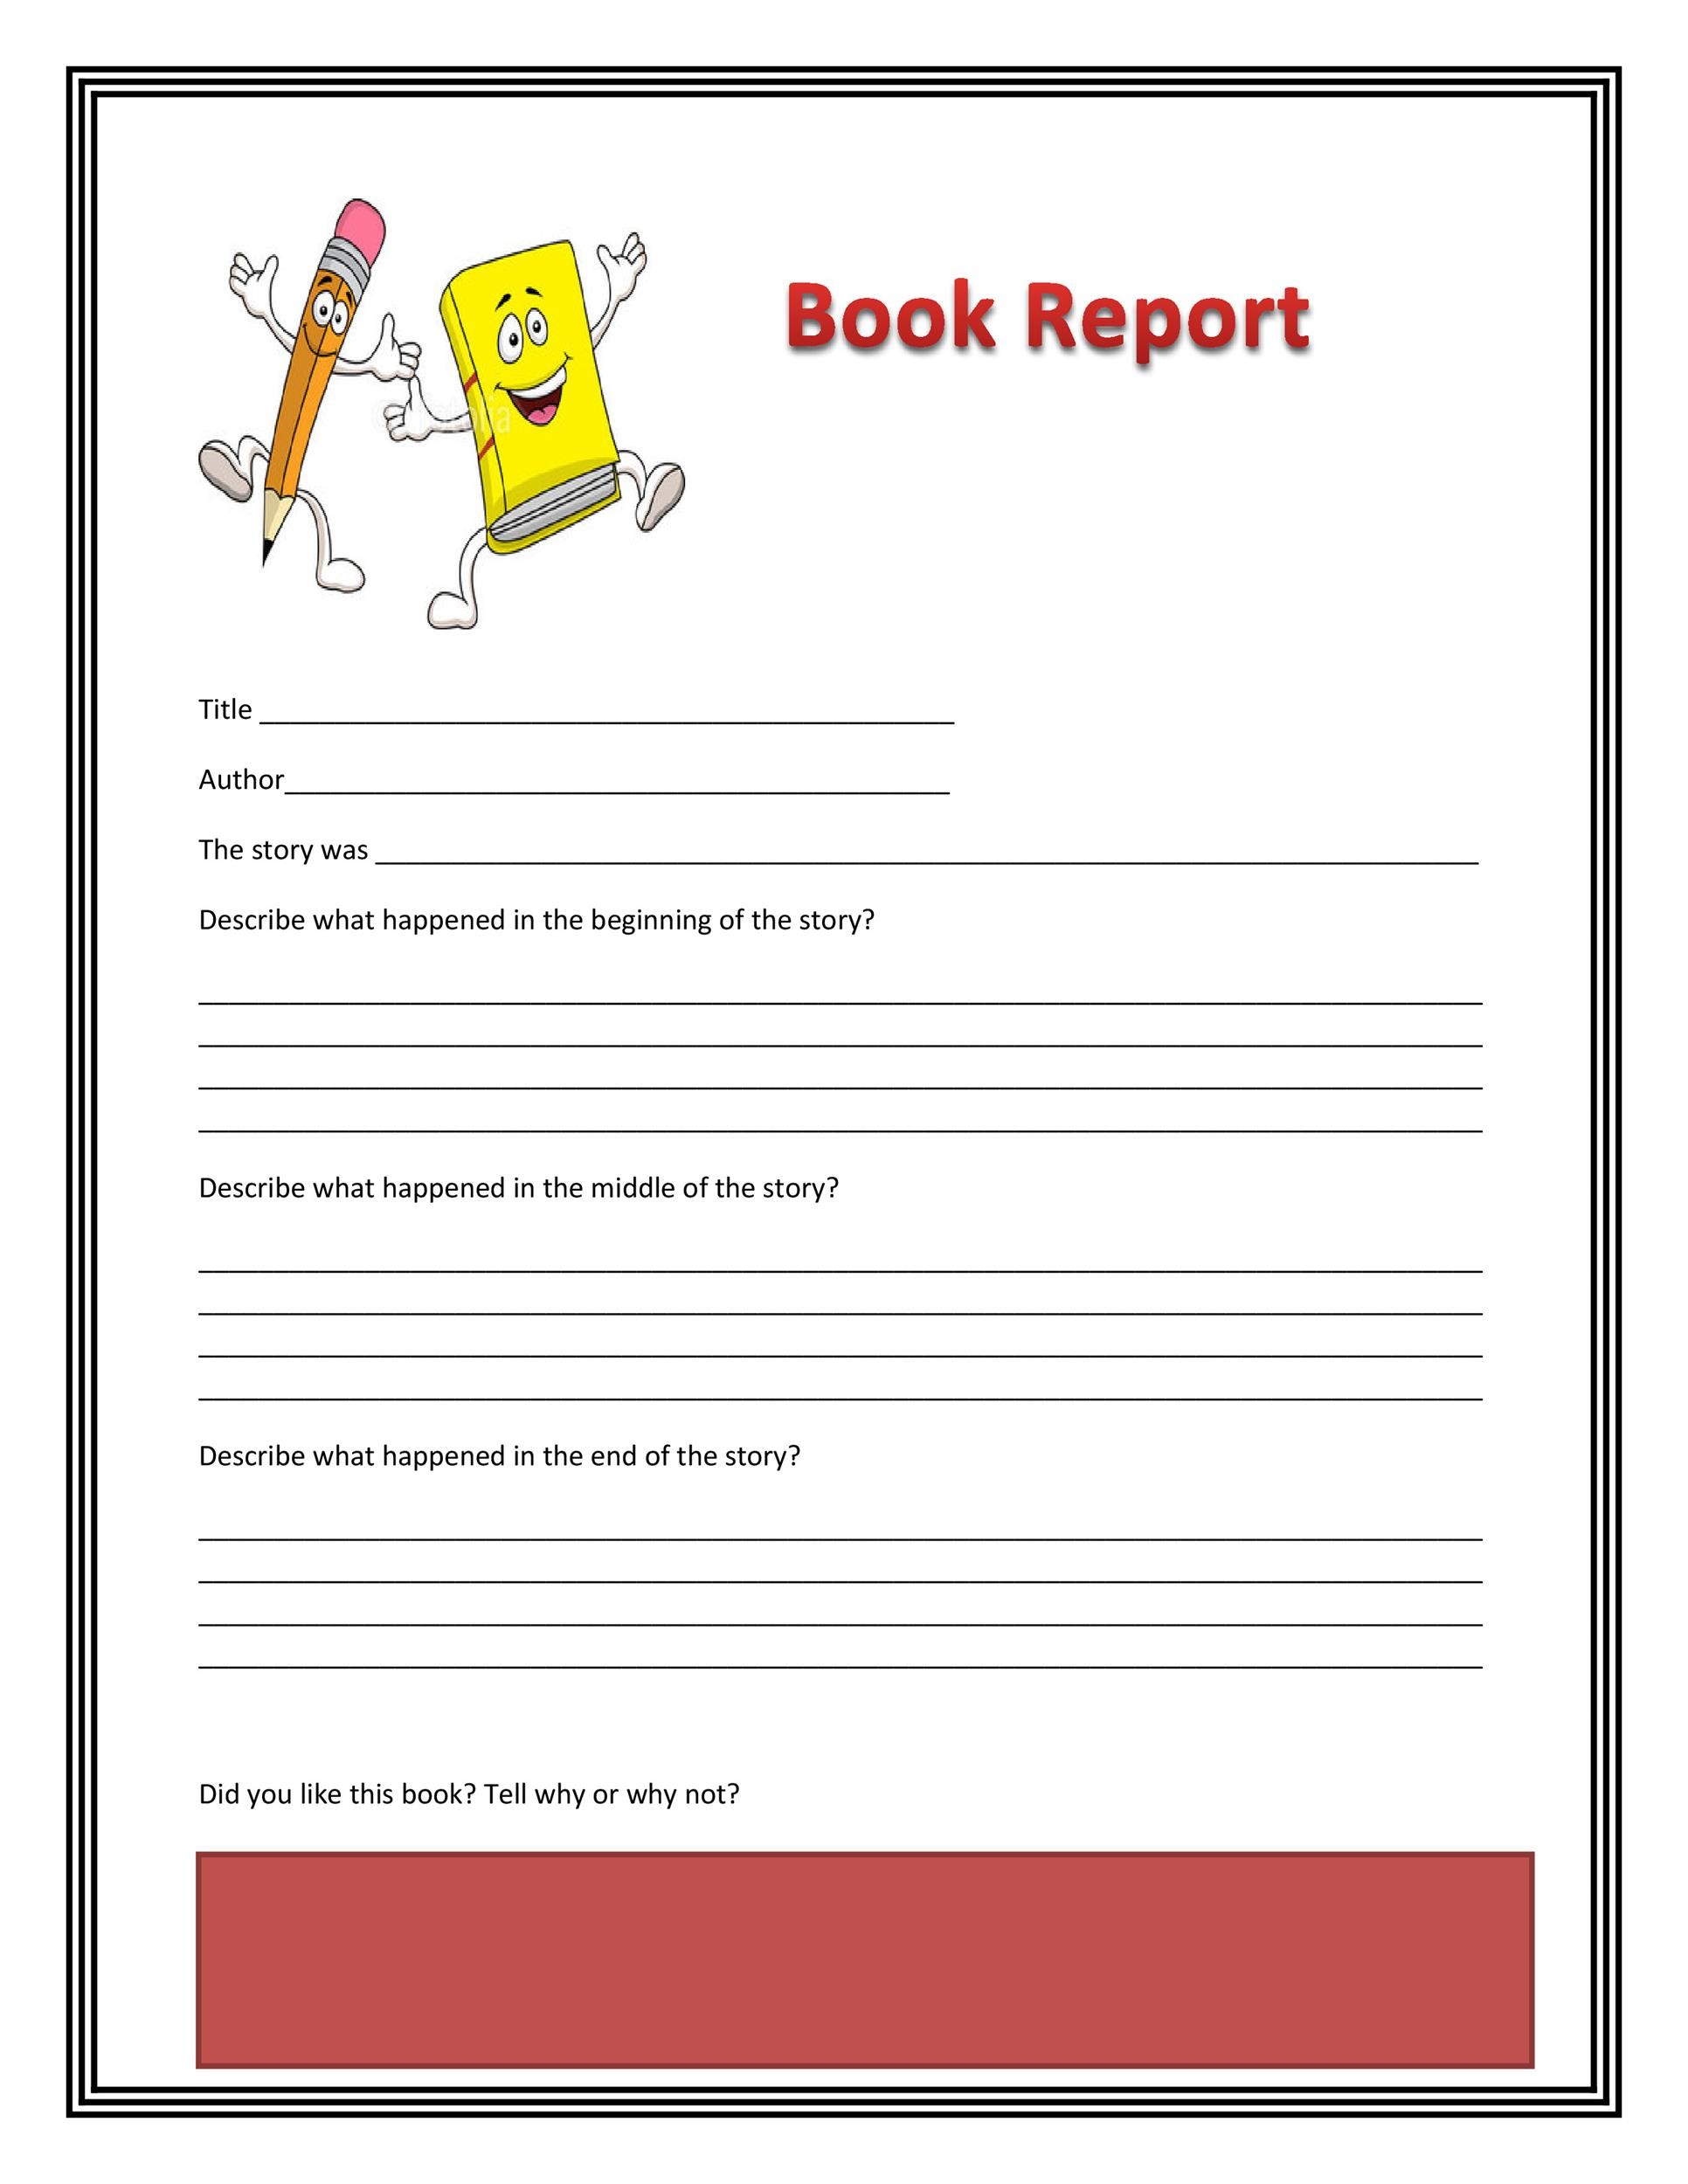 Sample Book Report Format Middle School Middle School Book Report 